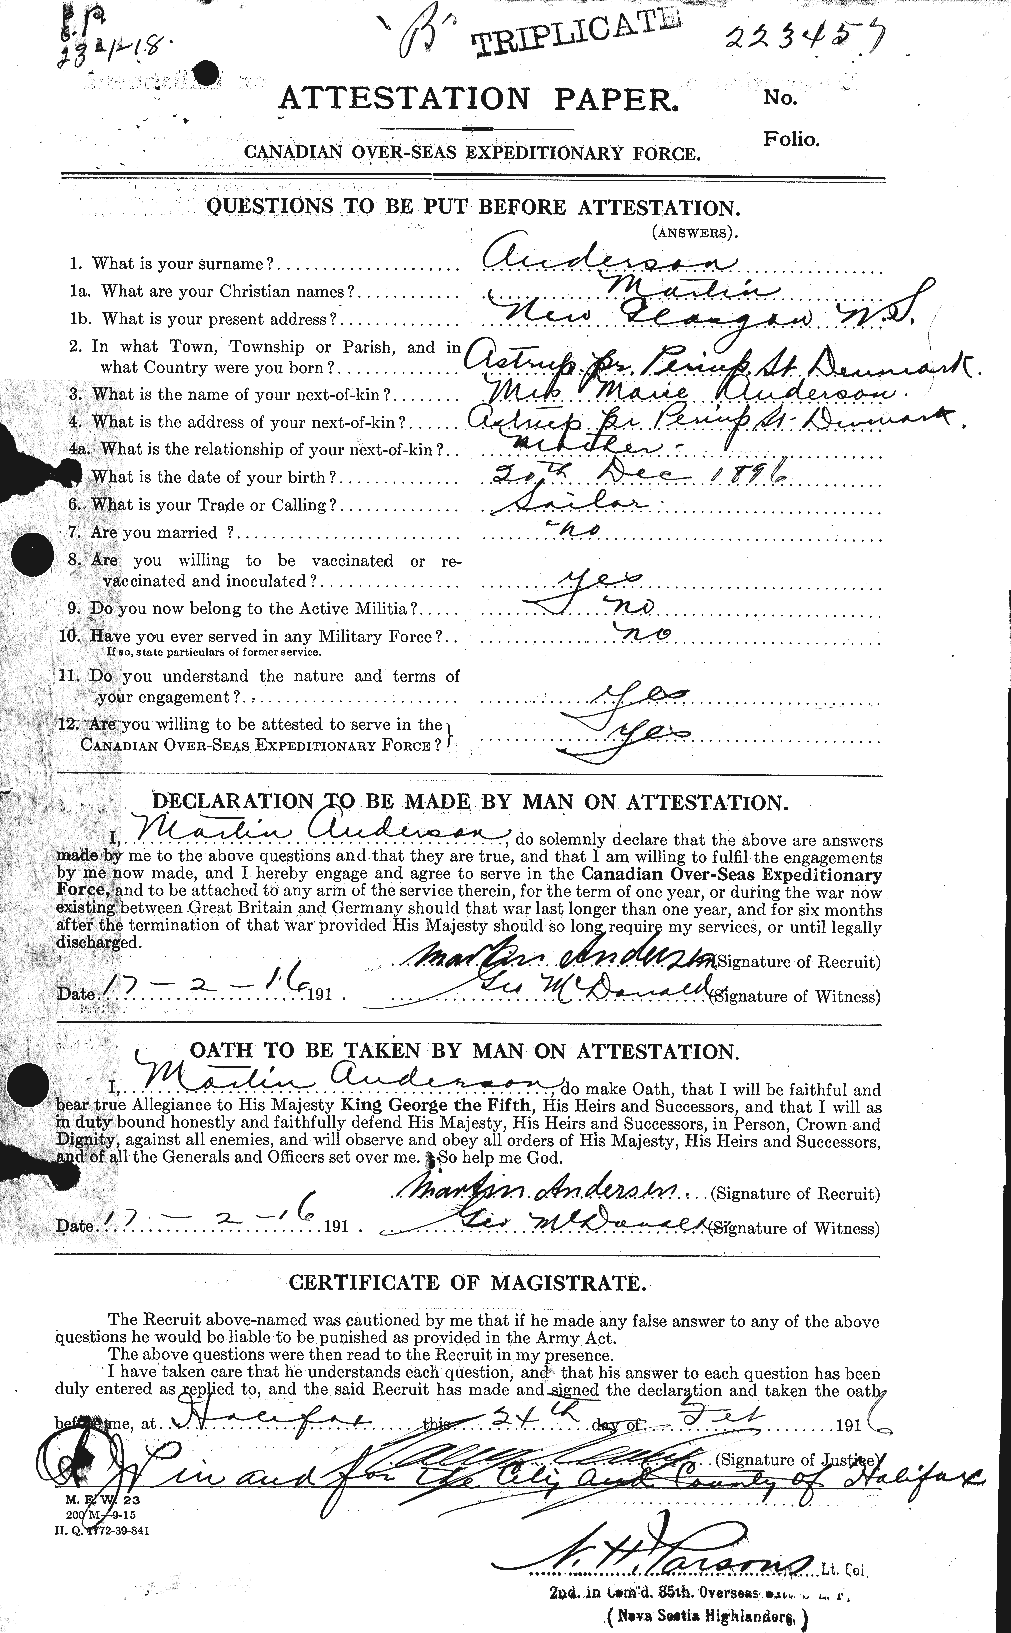 Personnel Records of the First World War - CEF 207474a